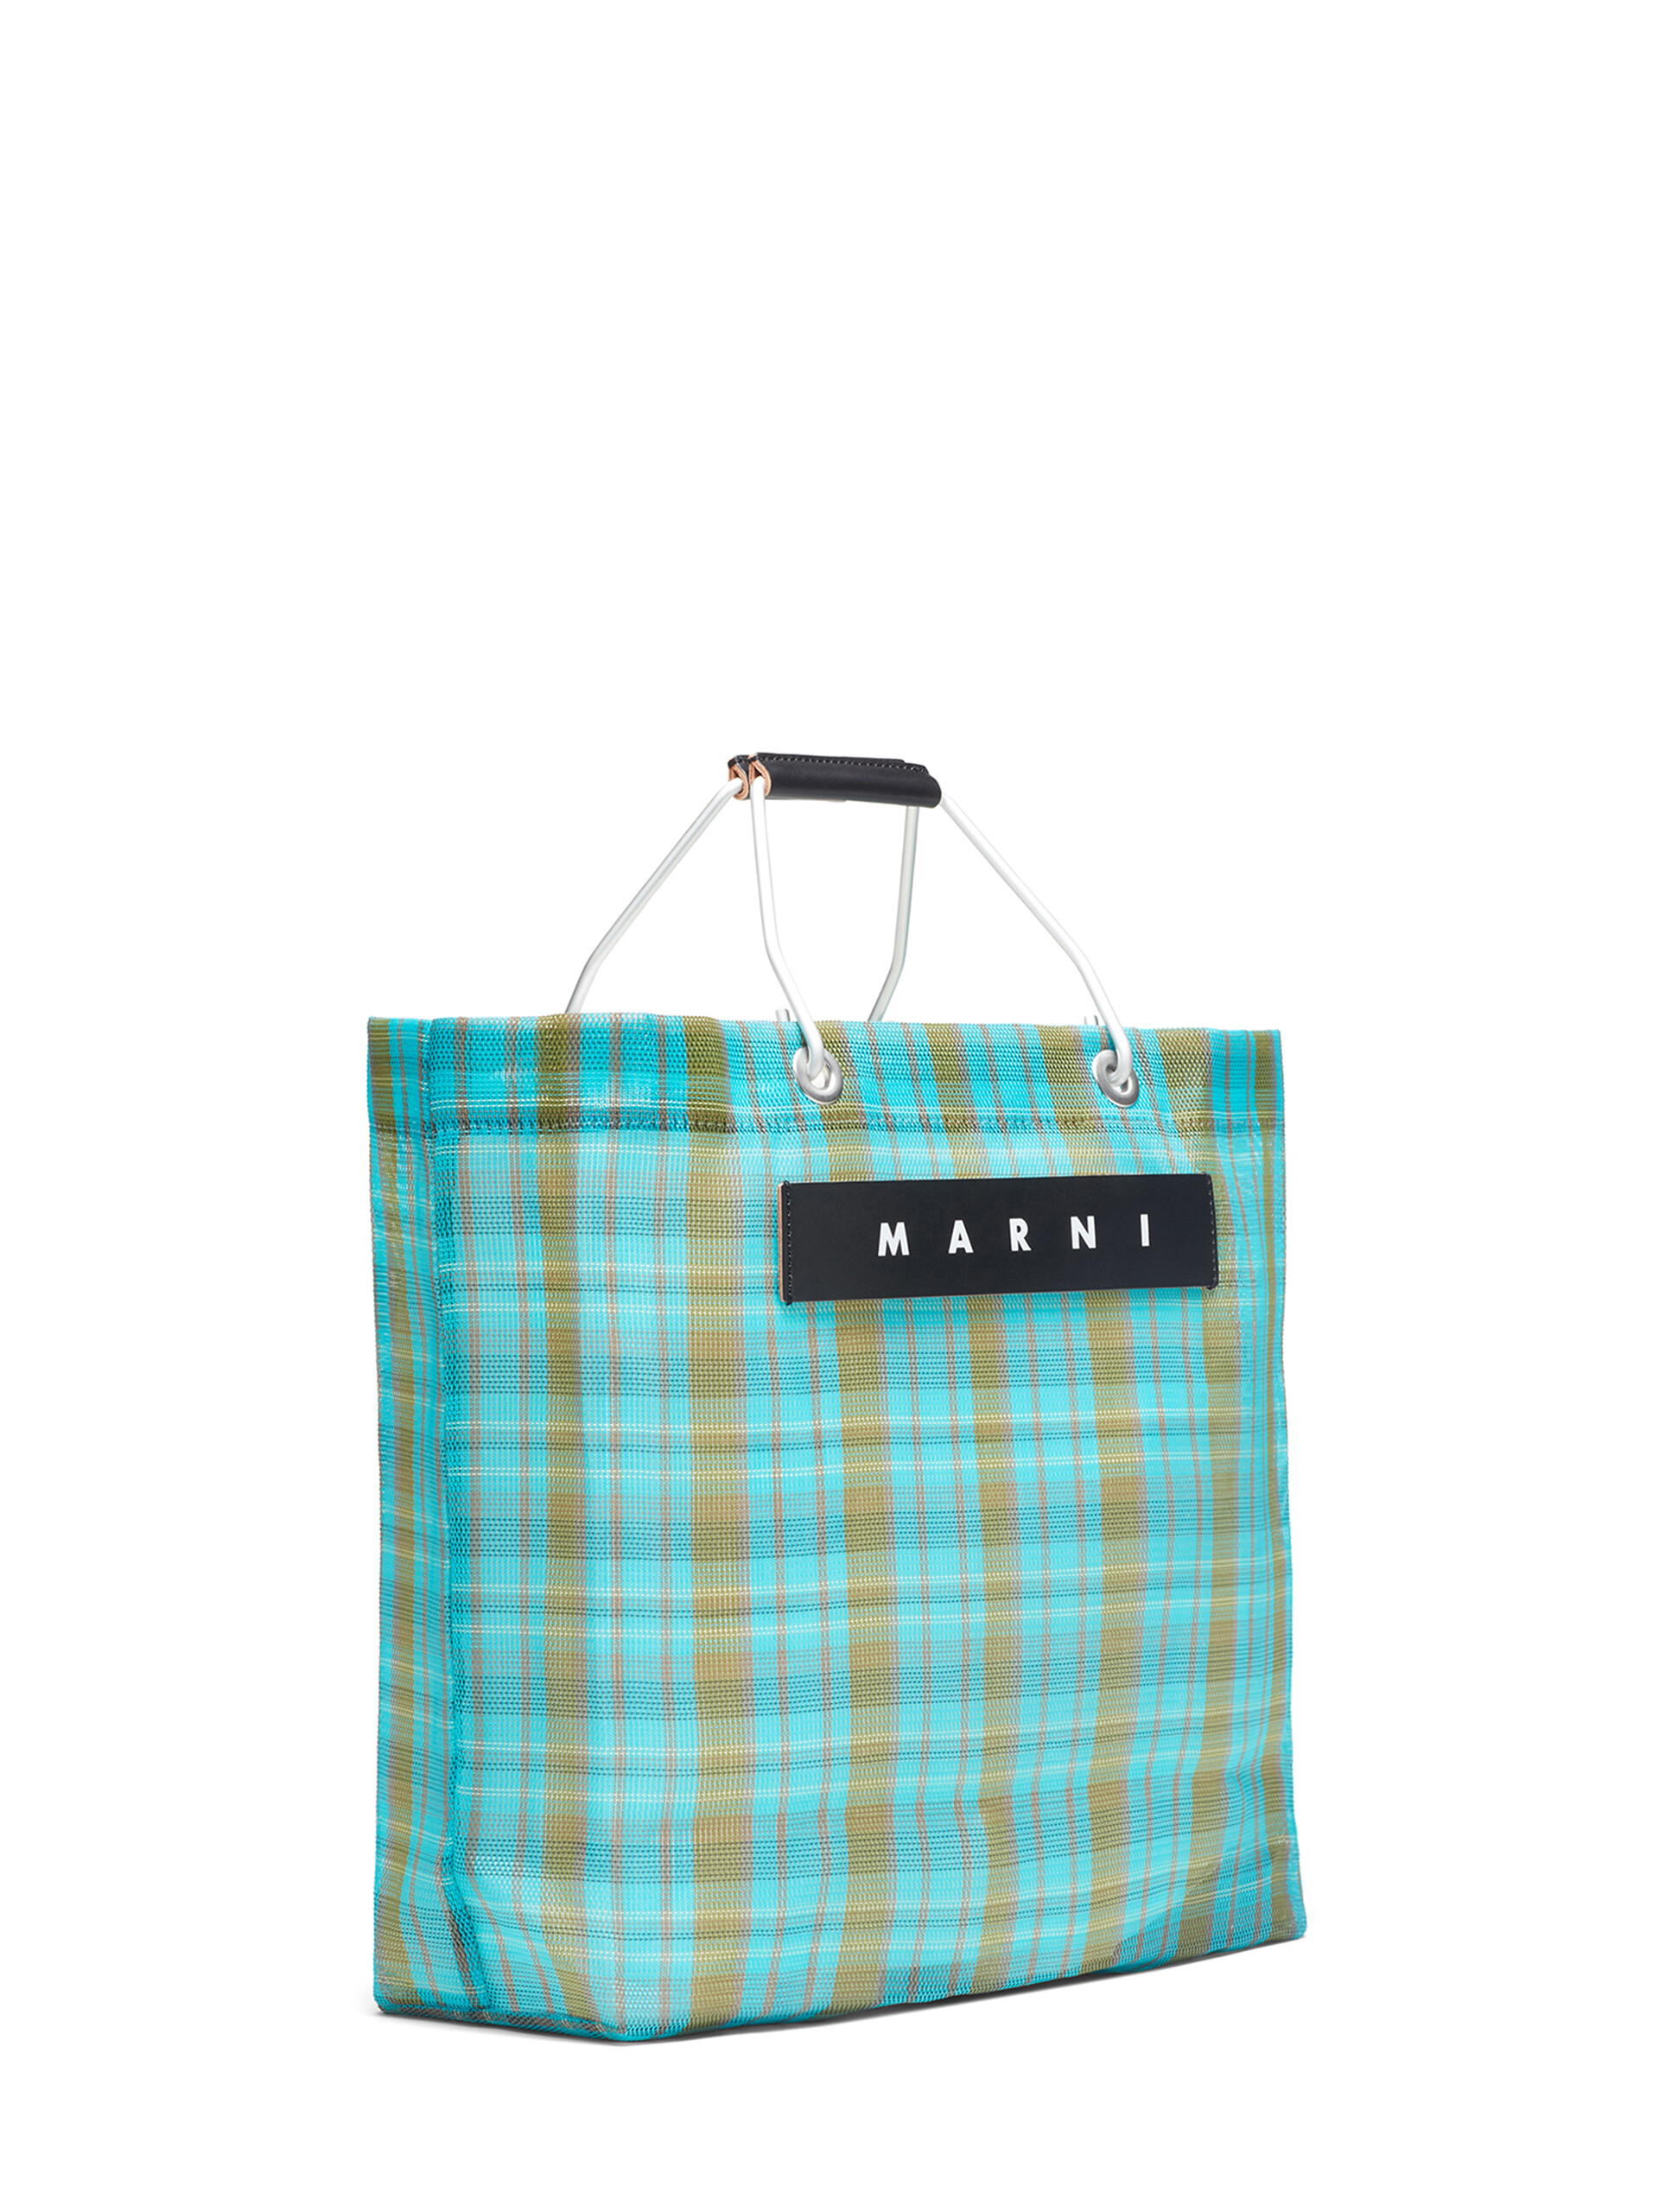 MARNI MARKET bag in pale blue and green - Shopping Bags - Image 2